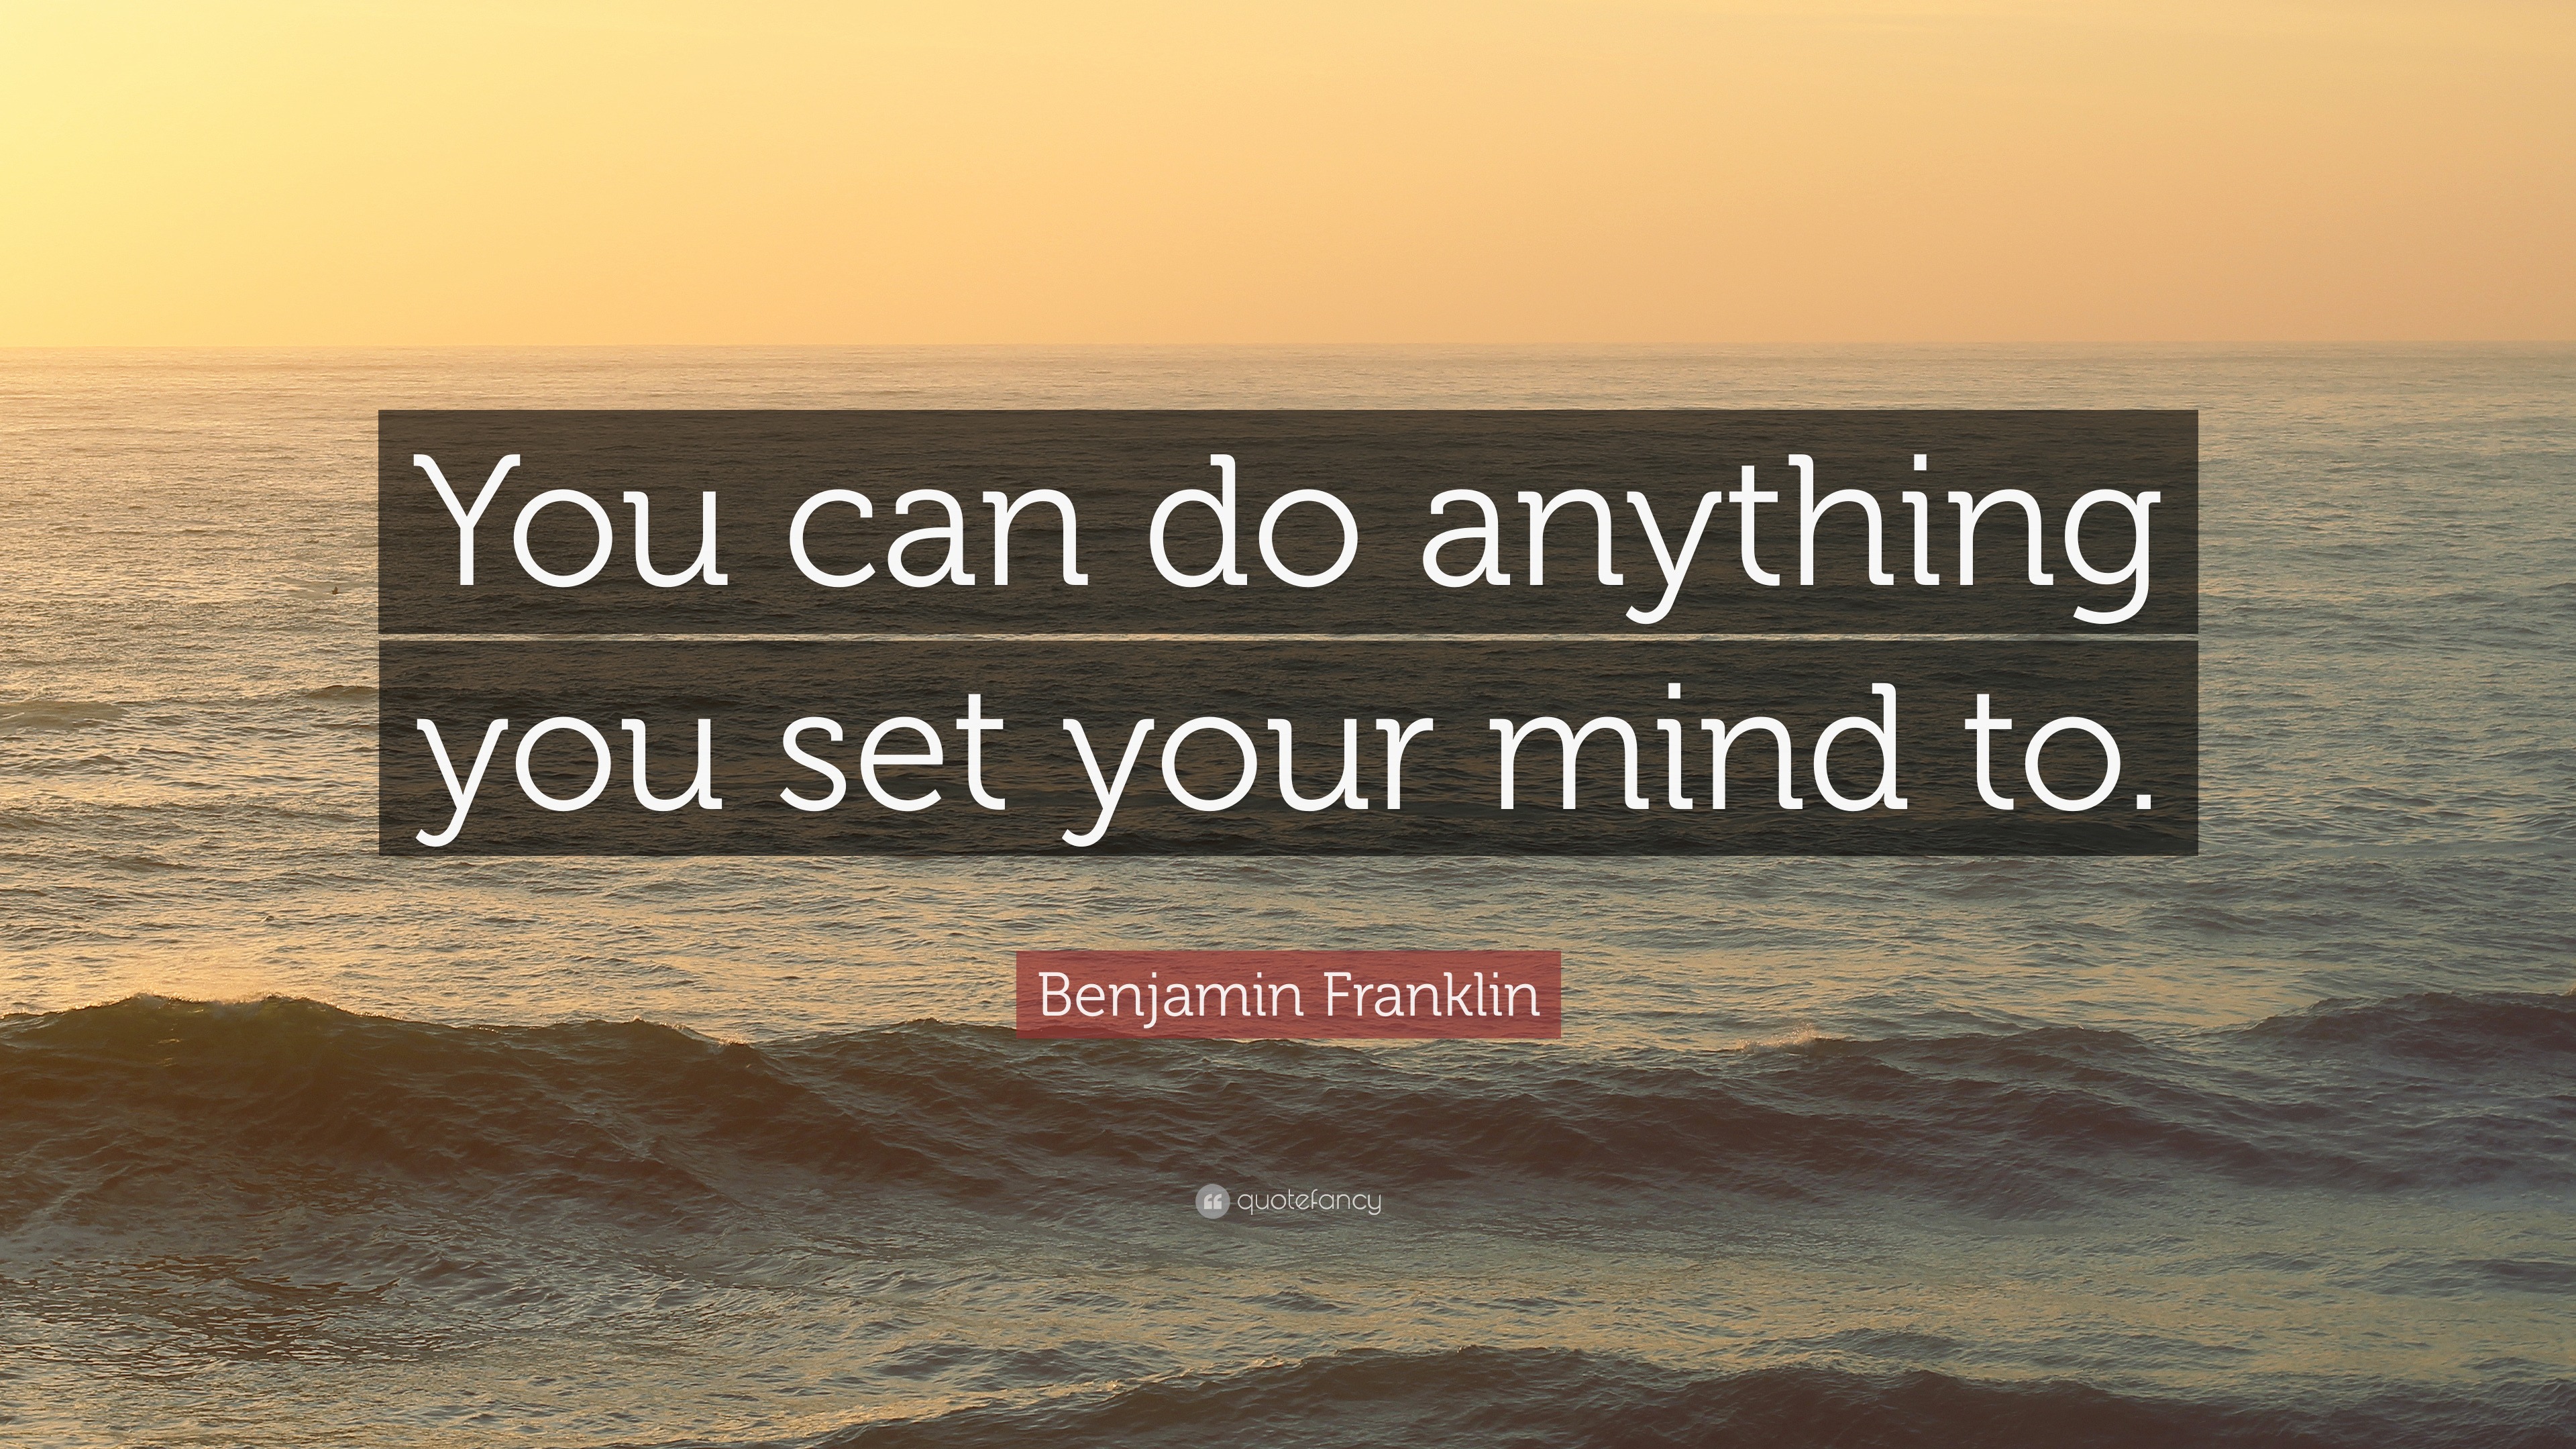 Great You Can Do Anything Quotes in the world Learn more here 